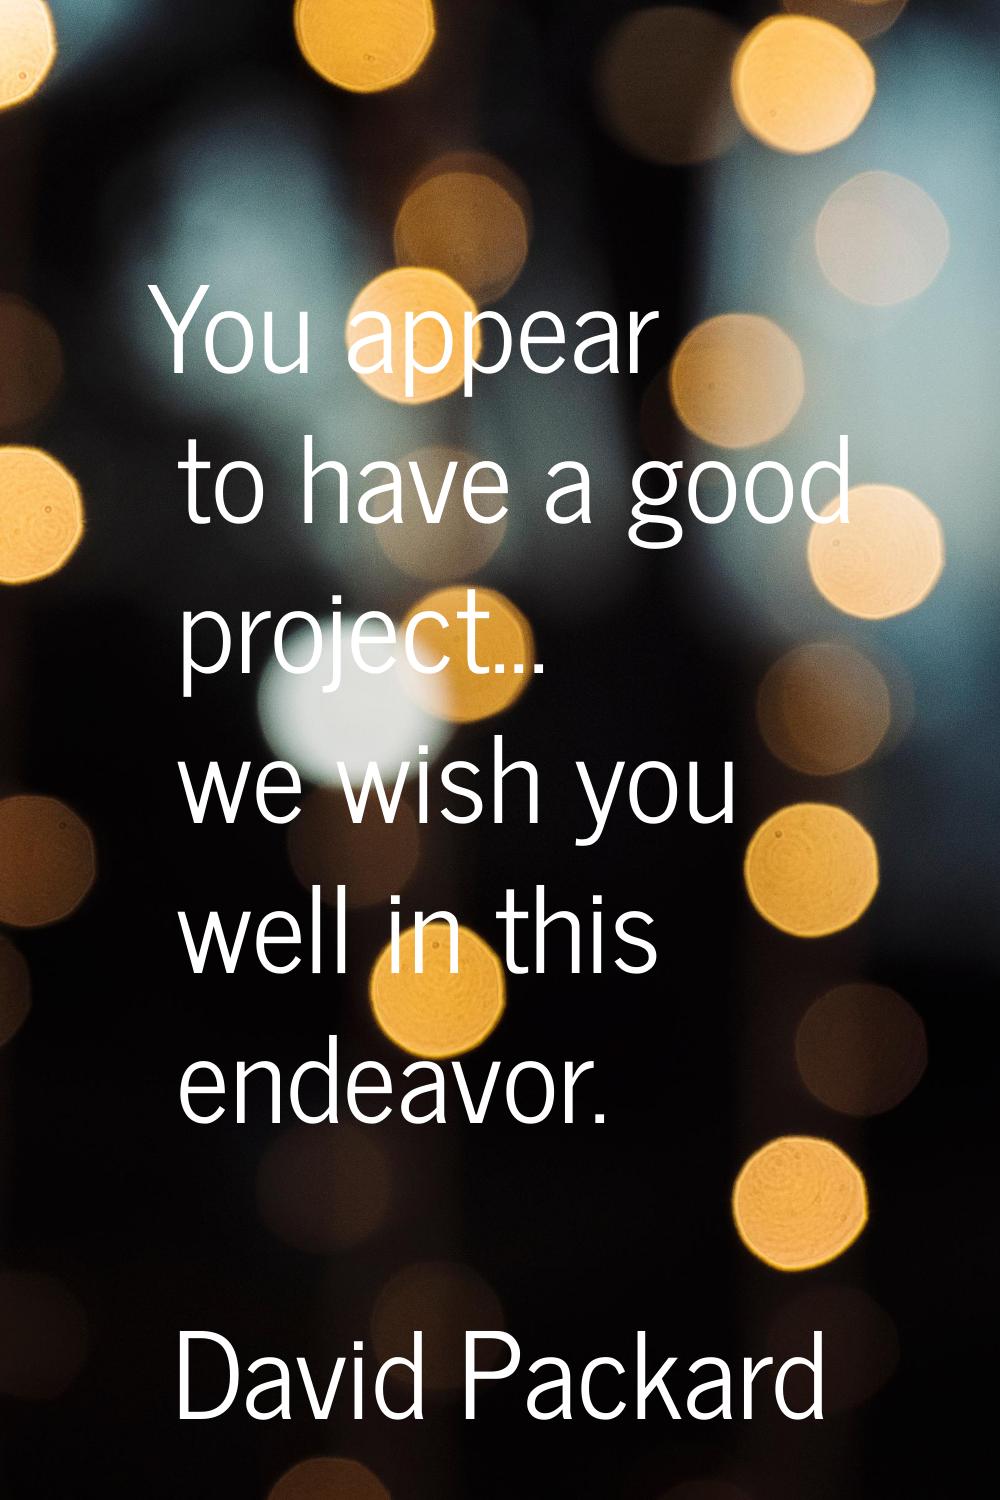 You appear to have a good project... we wish you well in this endeavor.